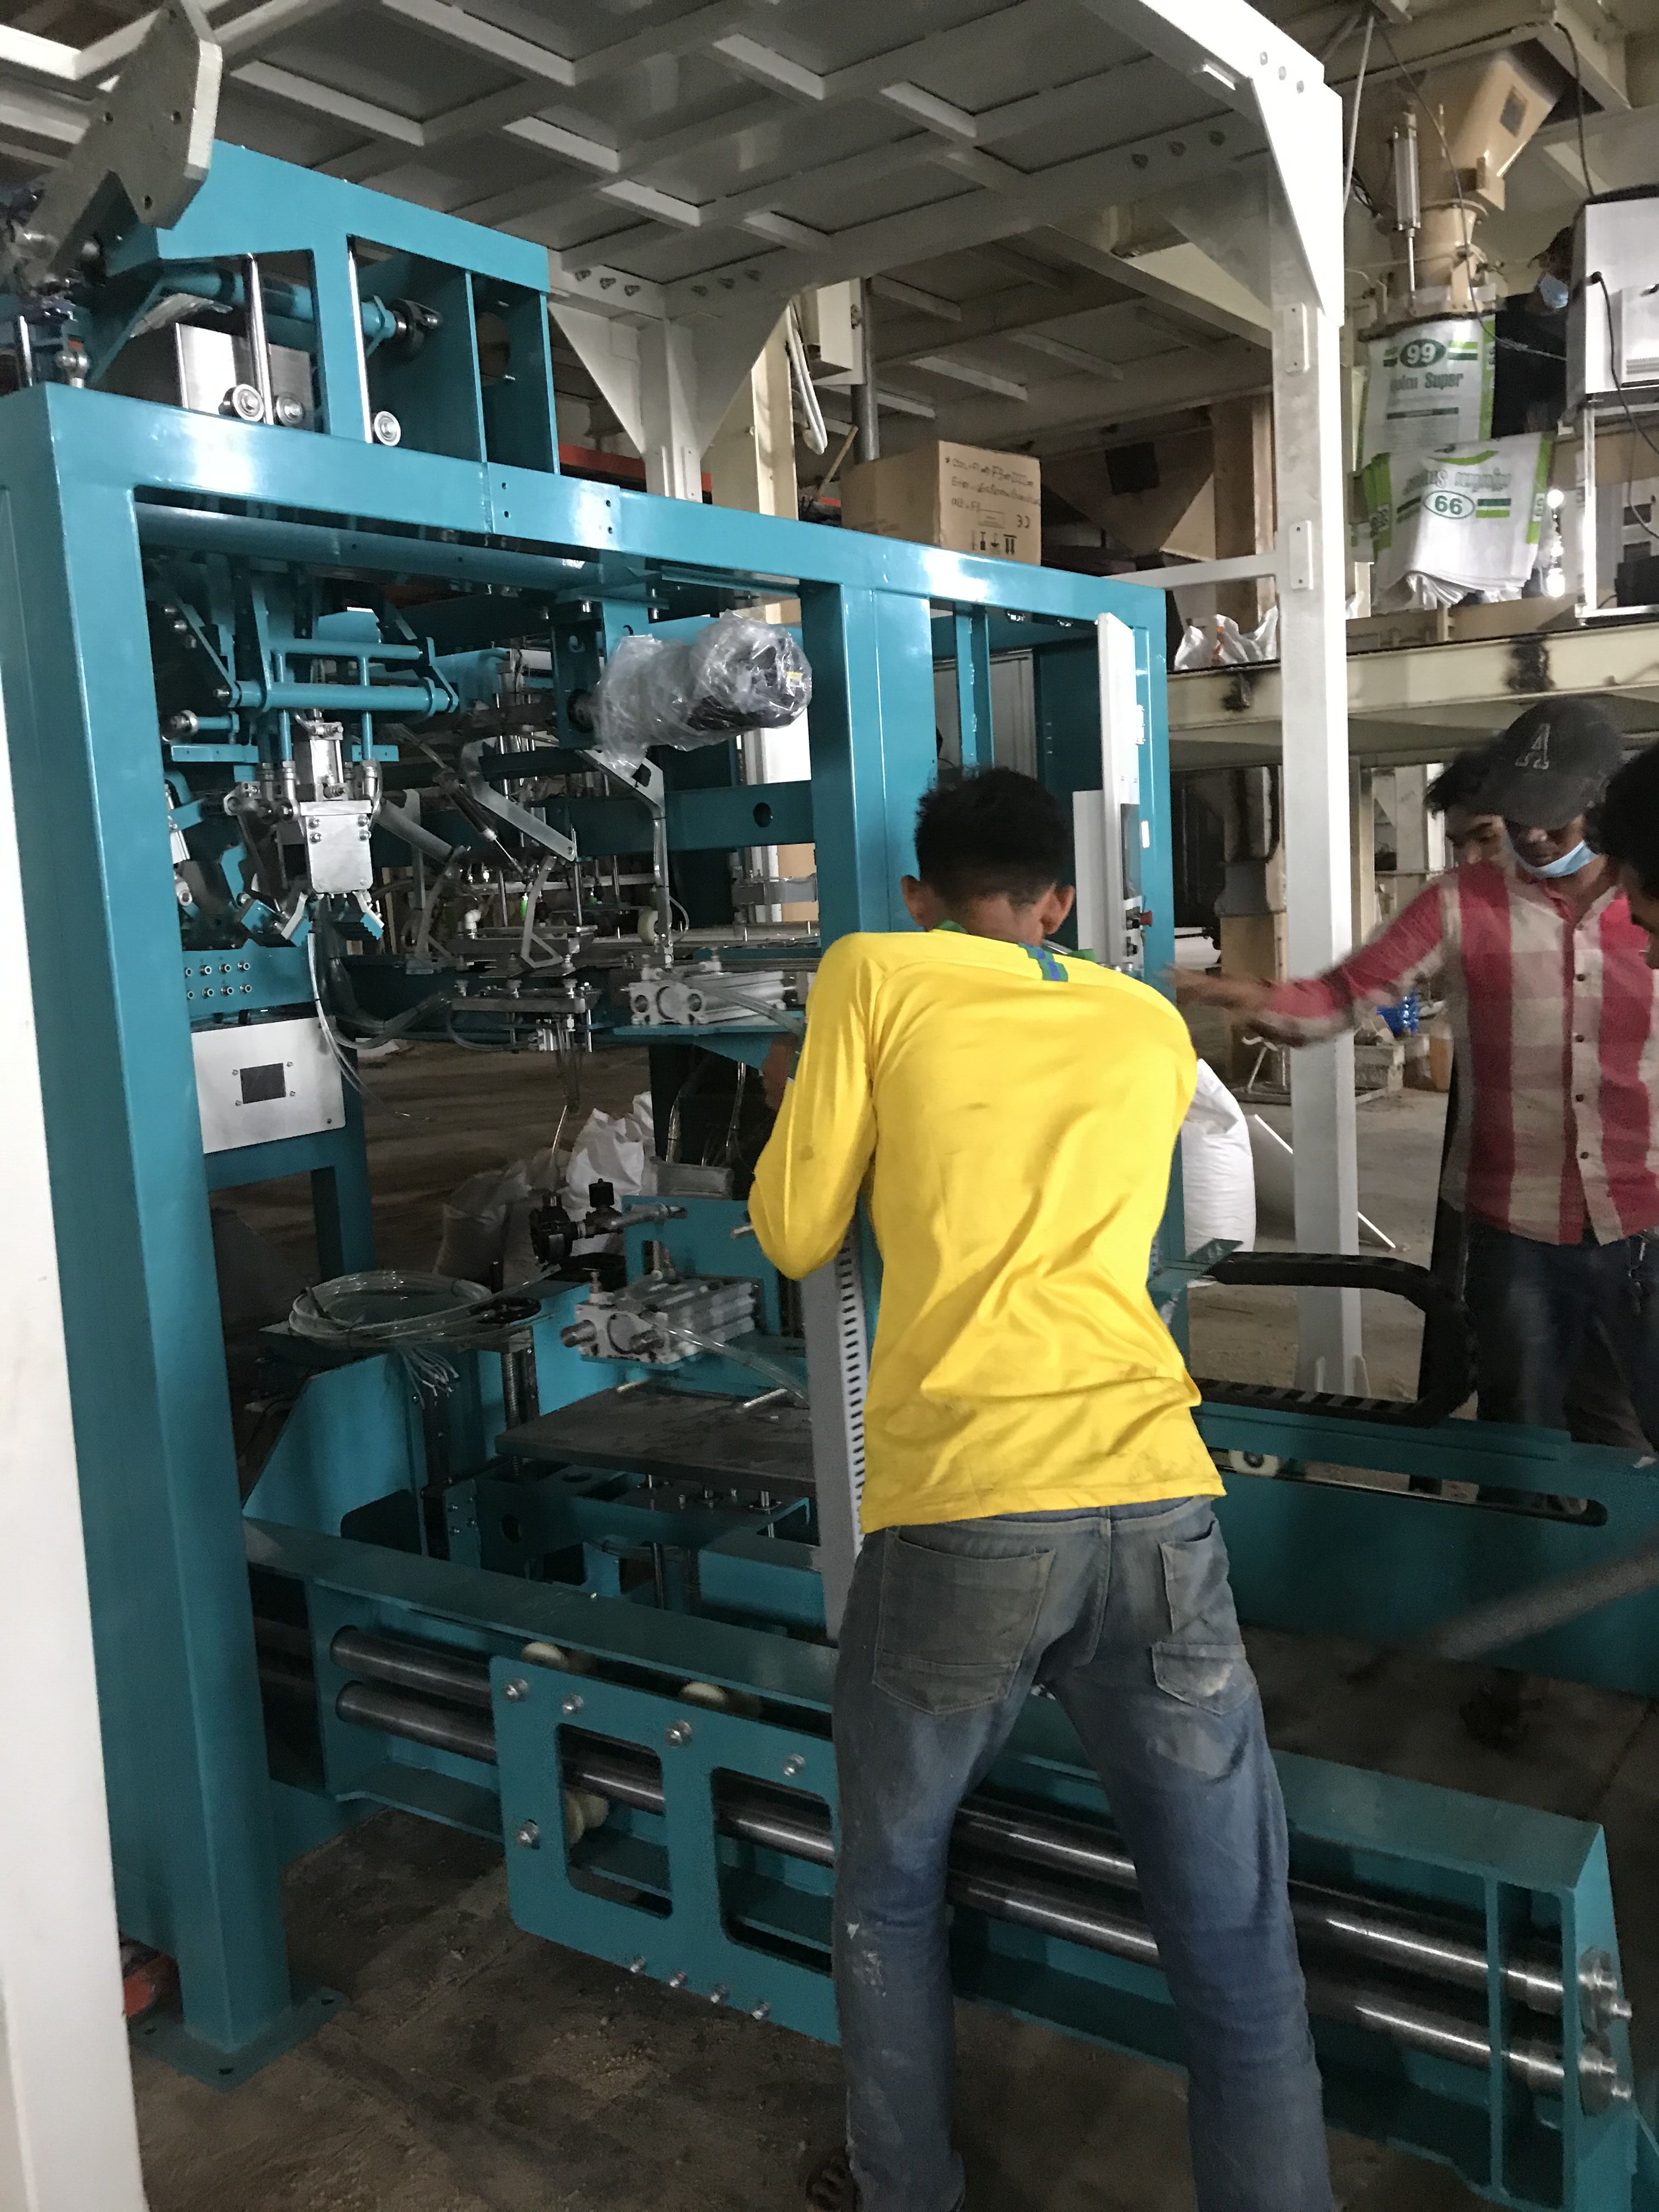 Food and Ingredients bagging machine packing machine fully Automatic Packing Palletizing Line, Fully Automatic Packing Line, Fully Automatic Bagging Line, Fully Automatic filling and packaging line, a